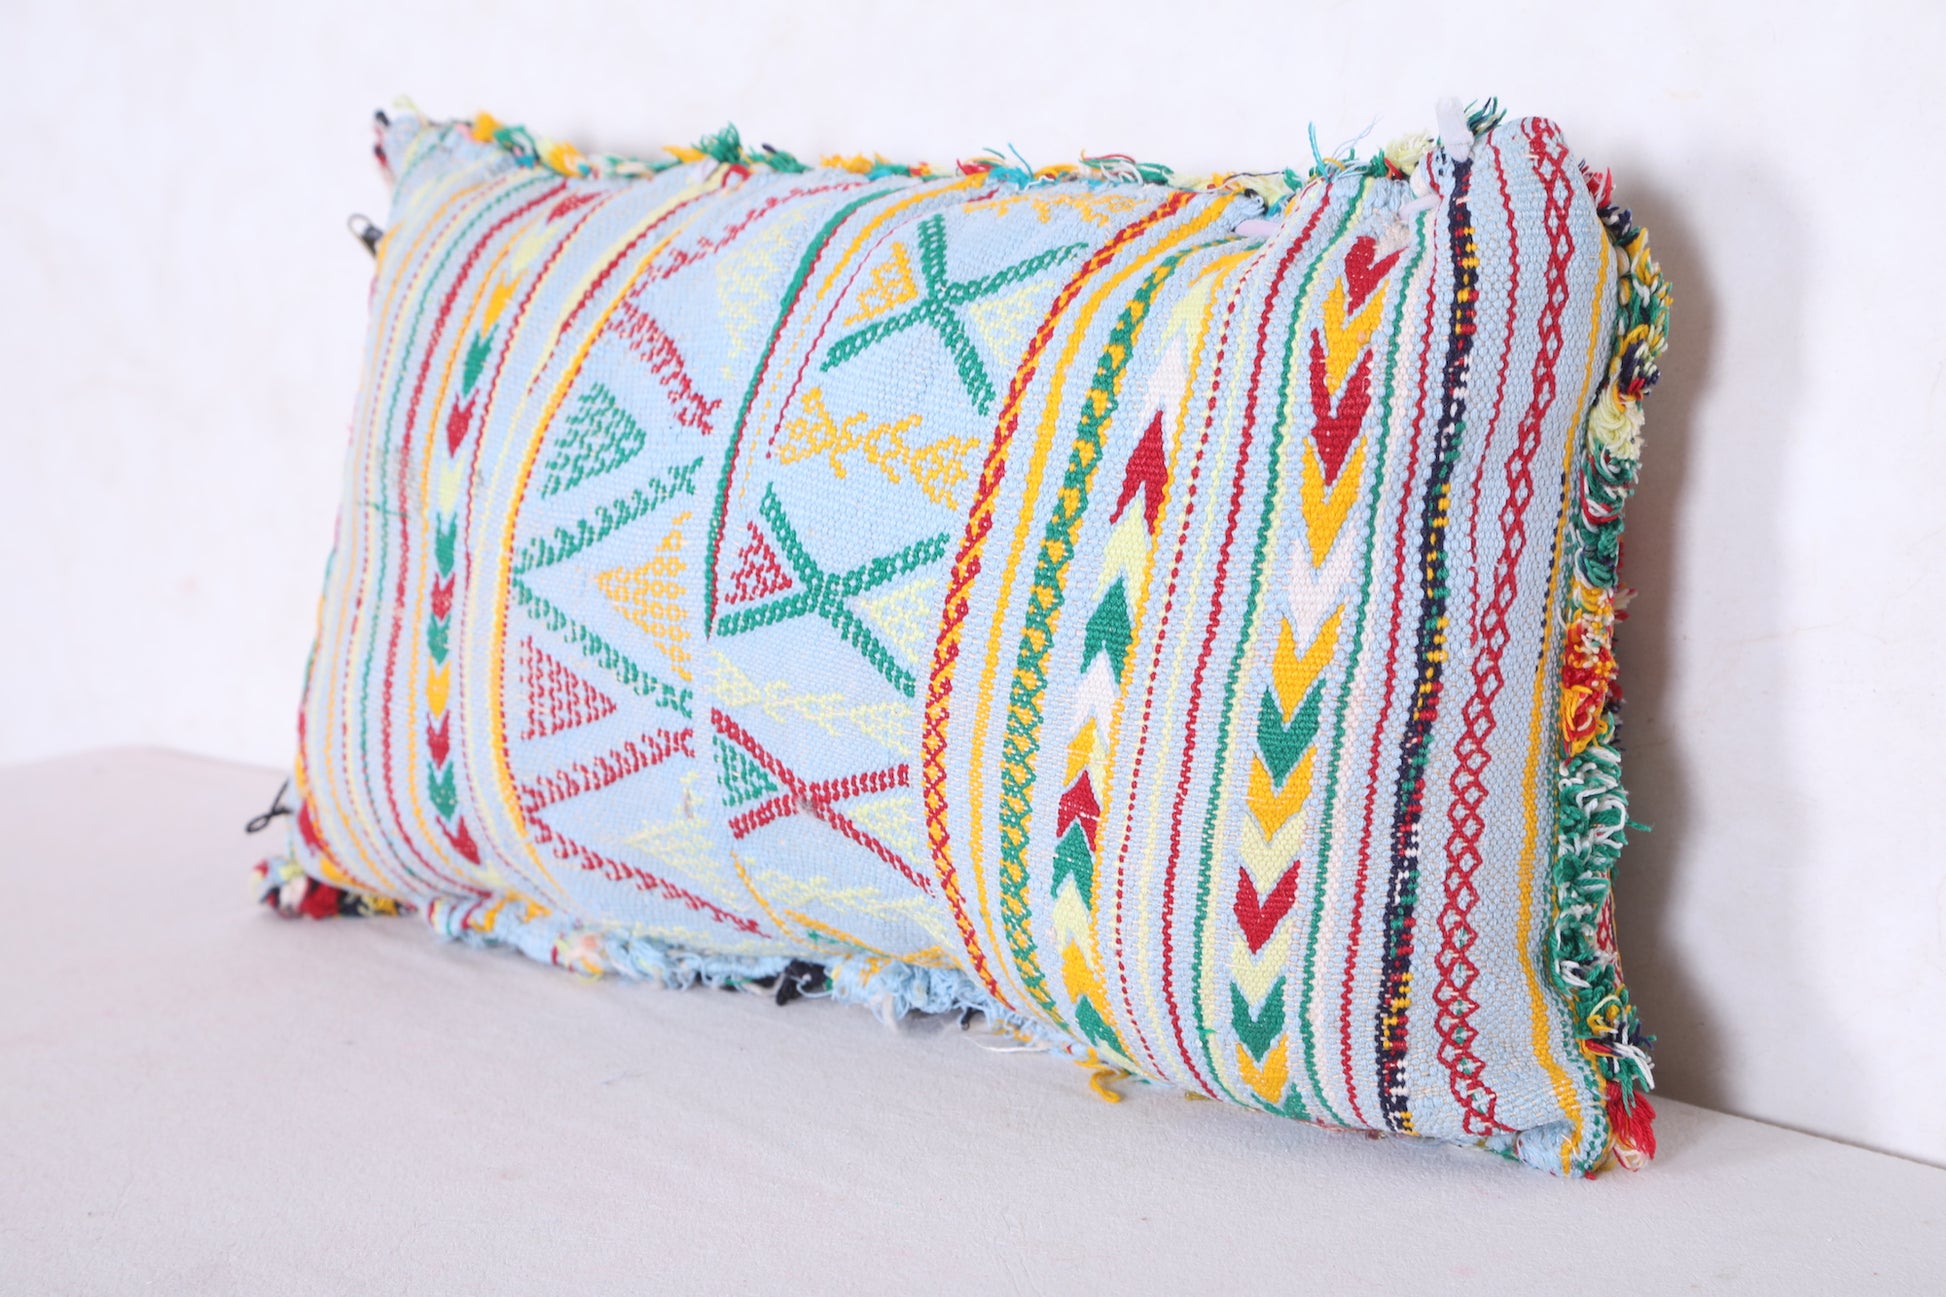 Moroccan handmade kilim pillow 14.1 INCHES X 22 INCHES